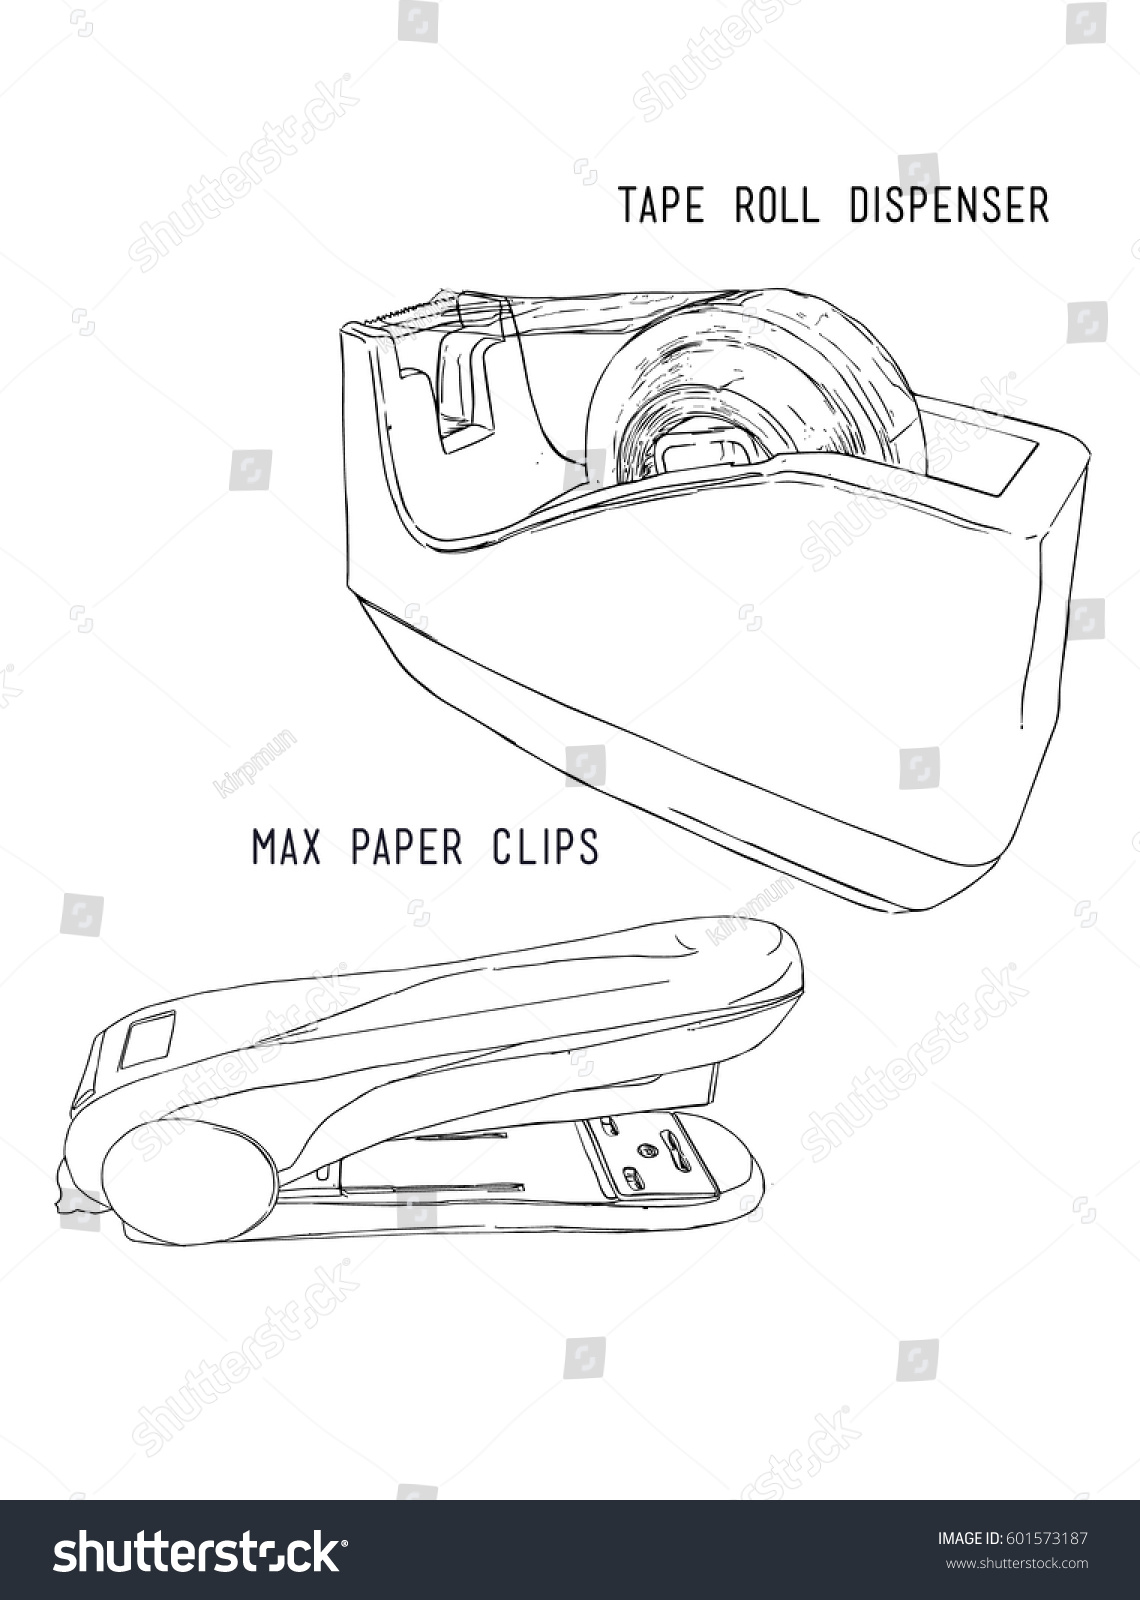 max papers